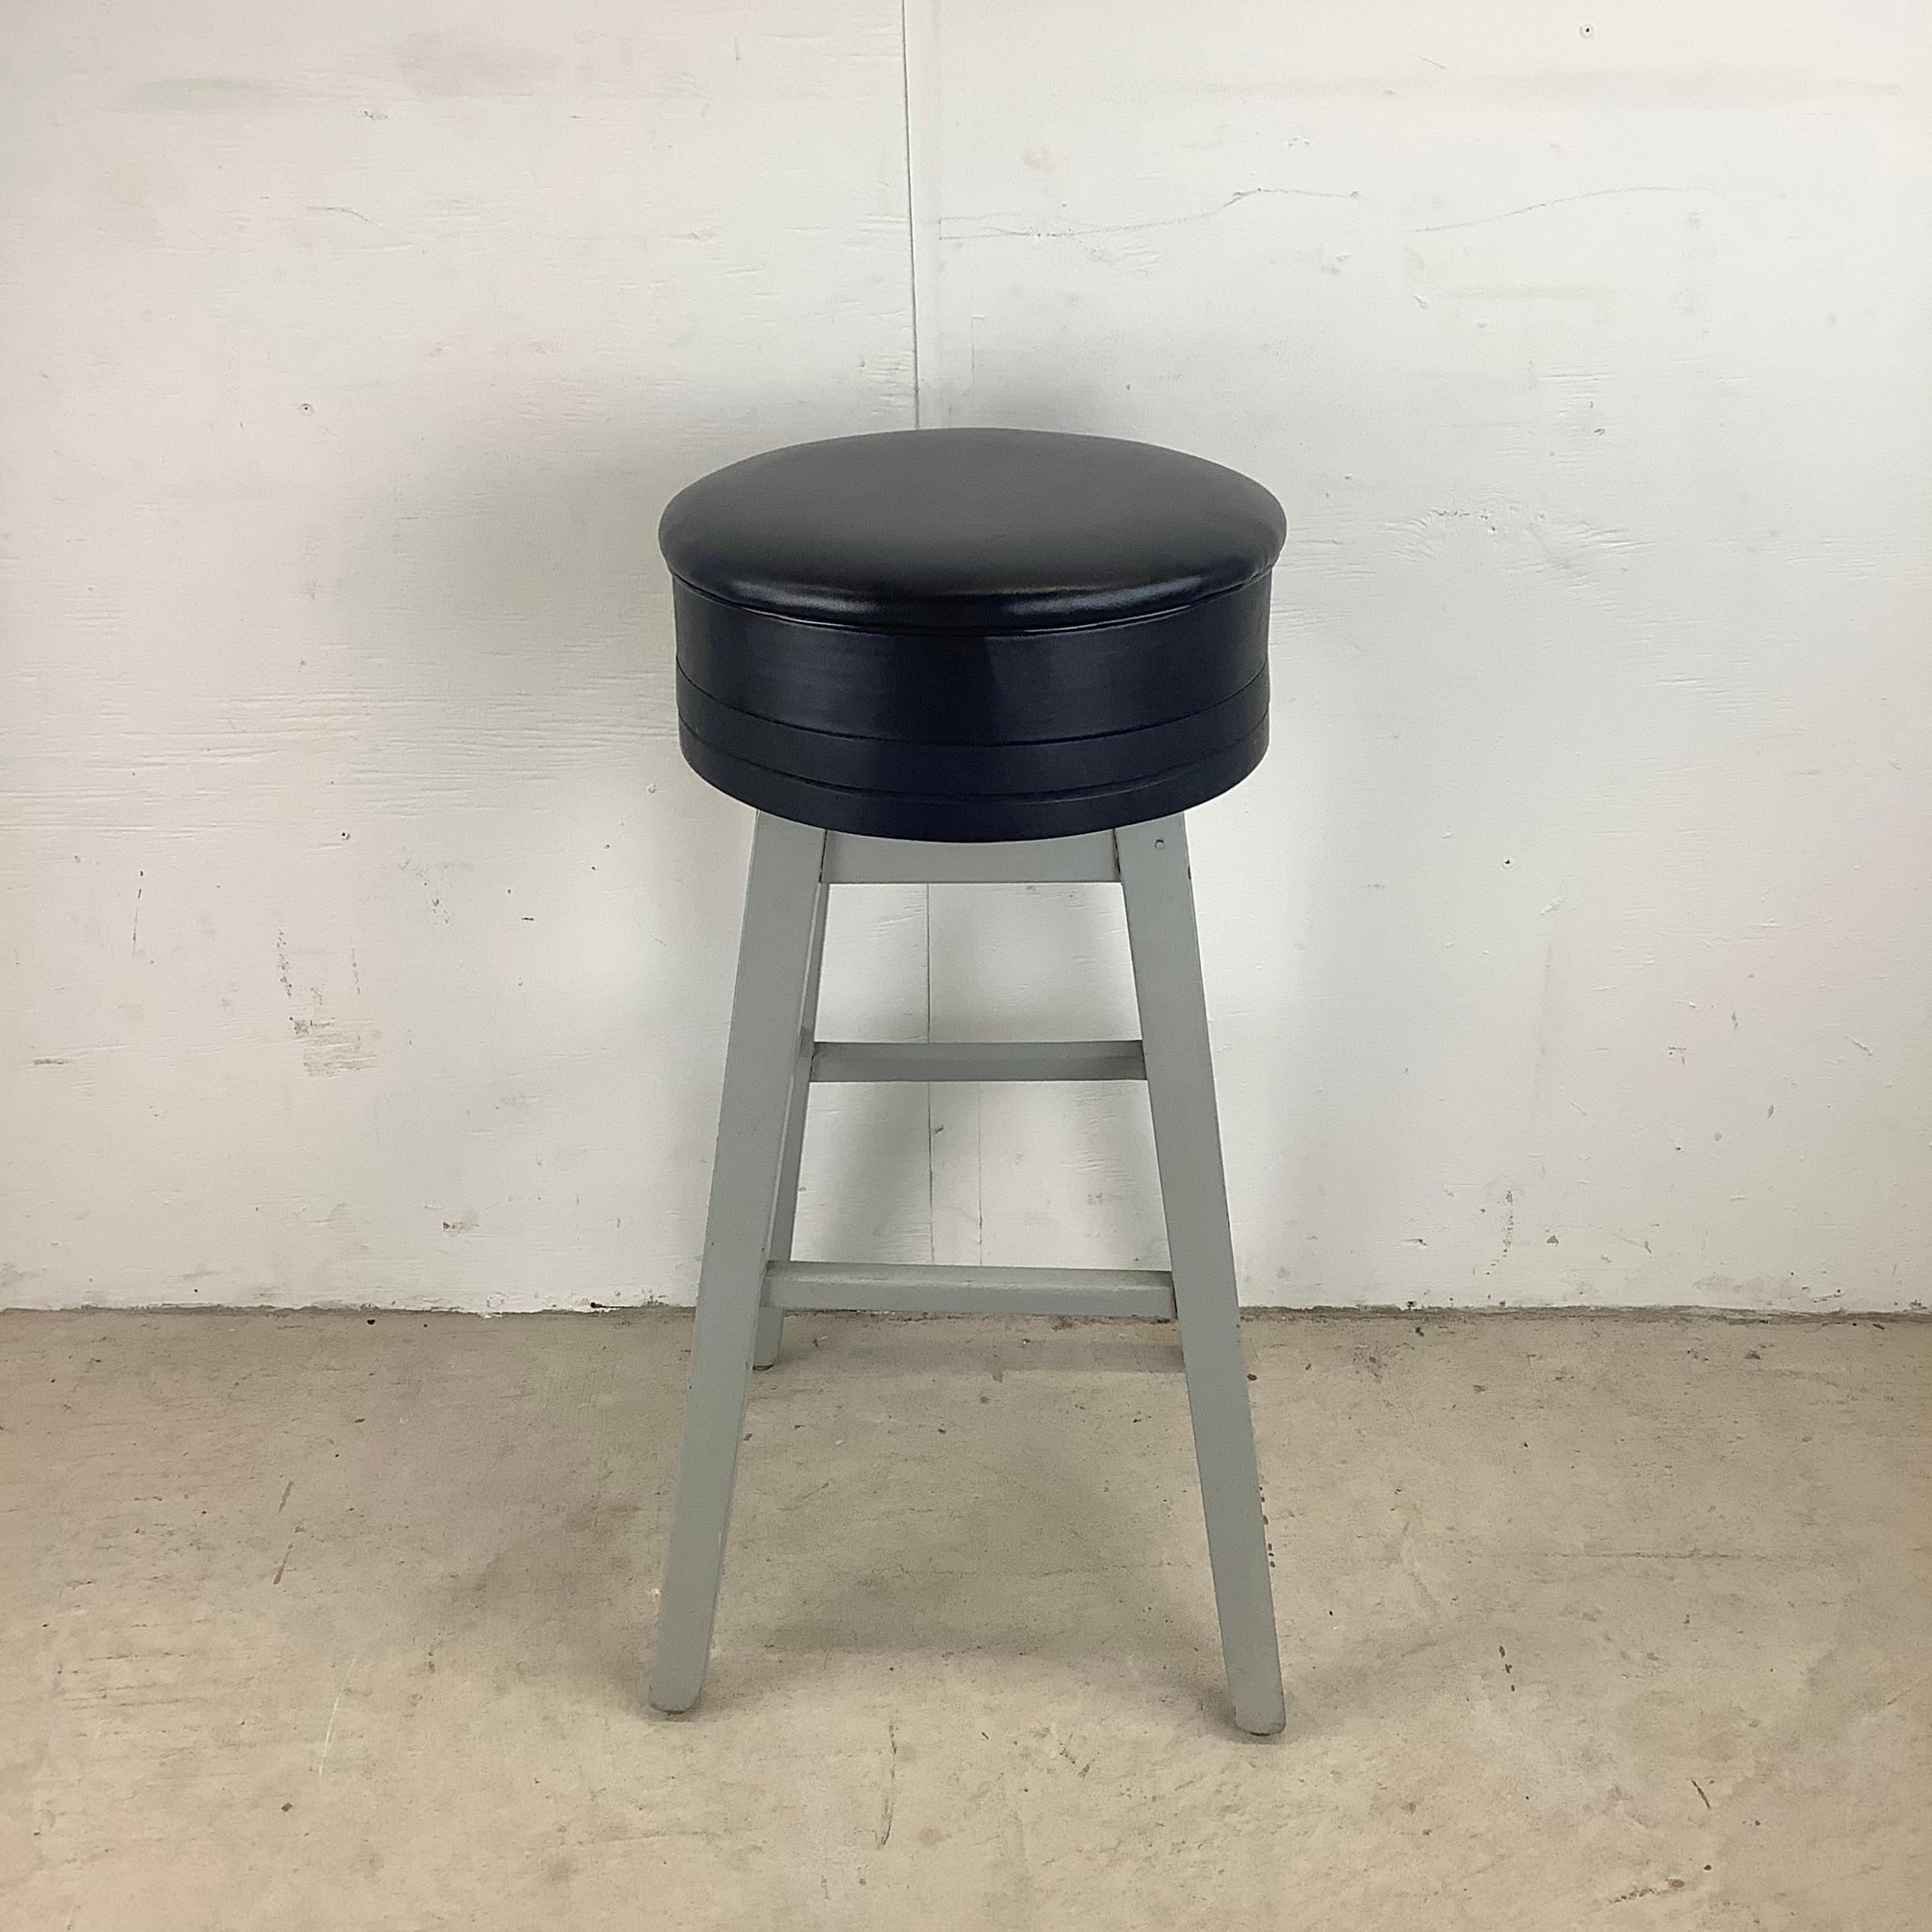 This simple industrial modern stool offers no frills occasional seating at unique workbench or counter height. Sturdy wooden frame and thick vinyl seat make this a utilitarian but comfortable addition to any workspace in need of stool